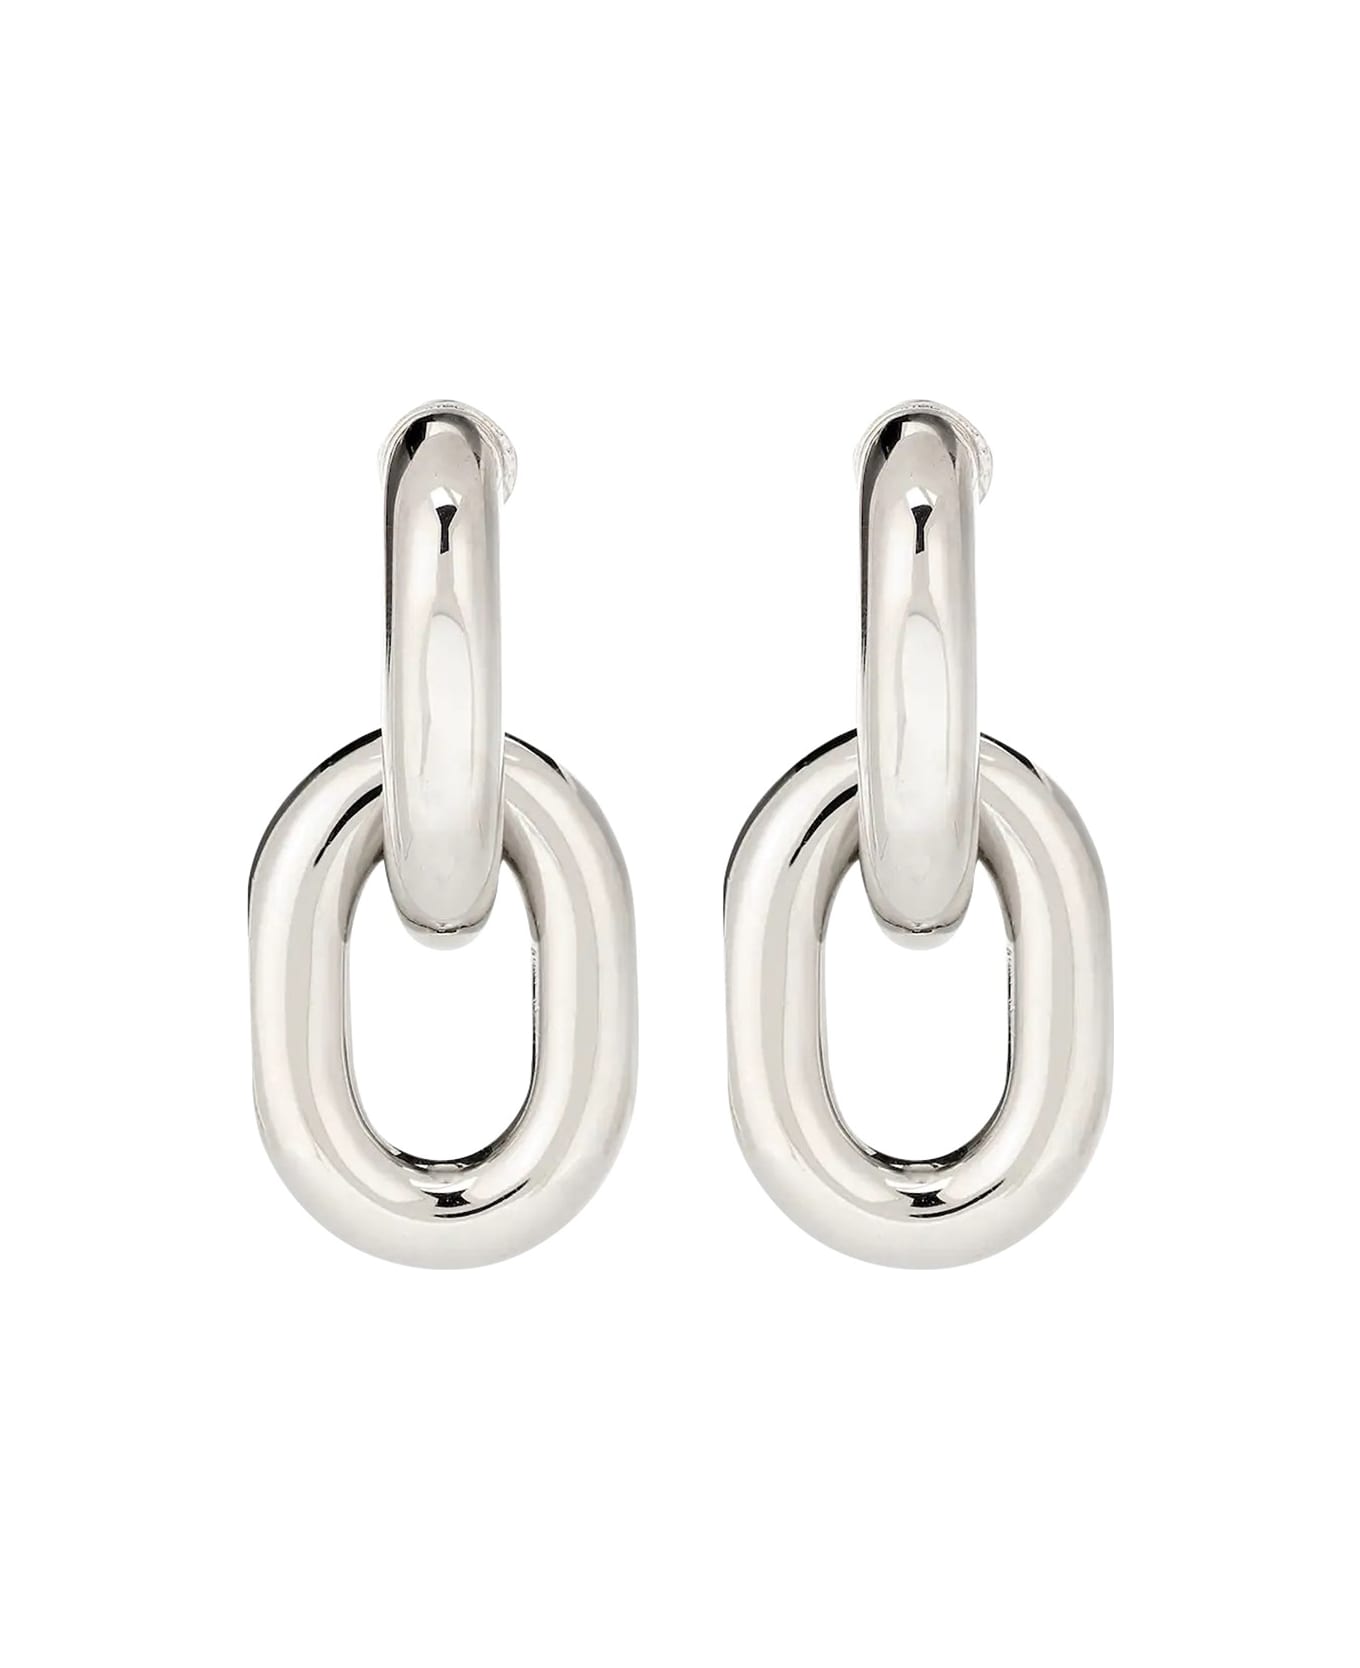 Paco Rabanne Double Hoop Accessories & Gifts - ARGENTO